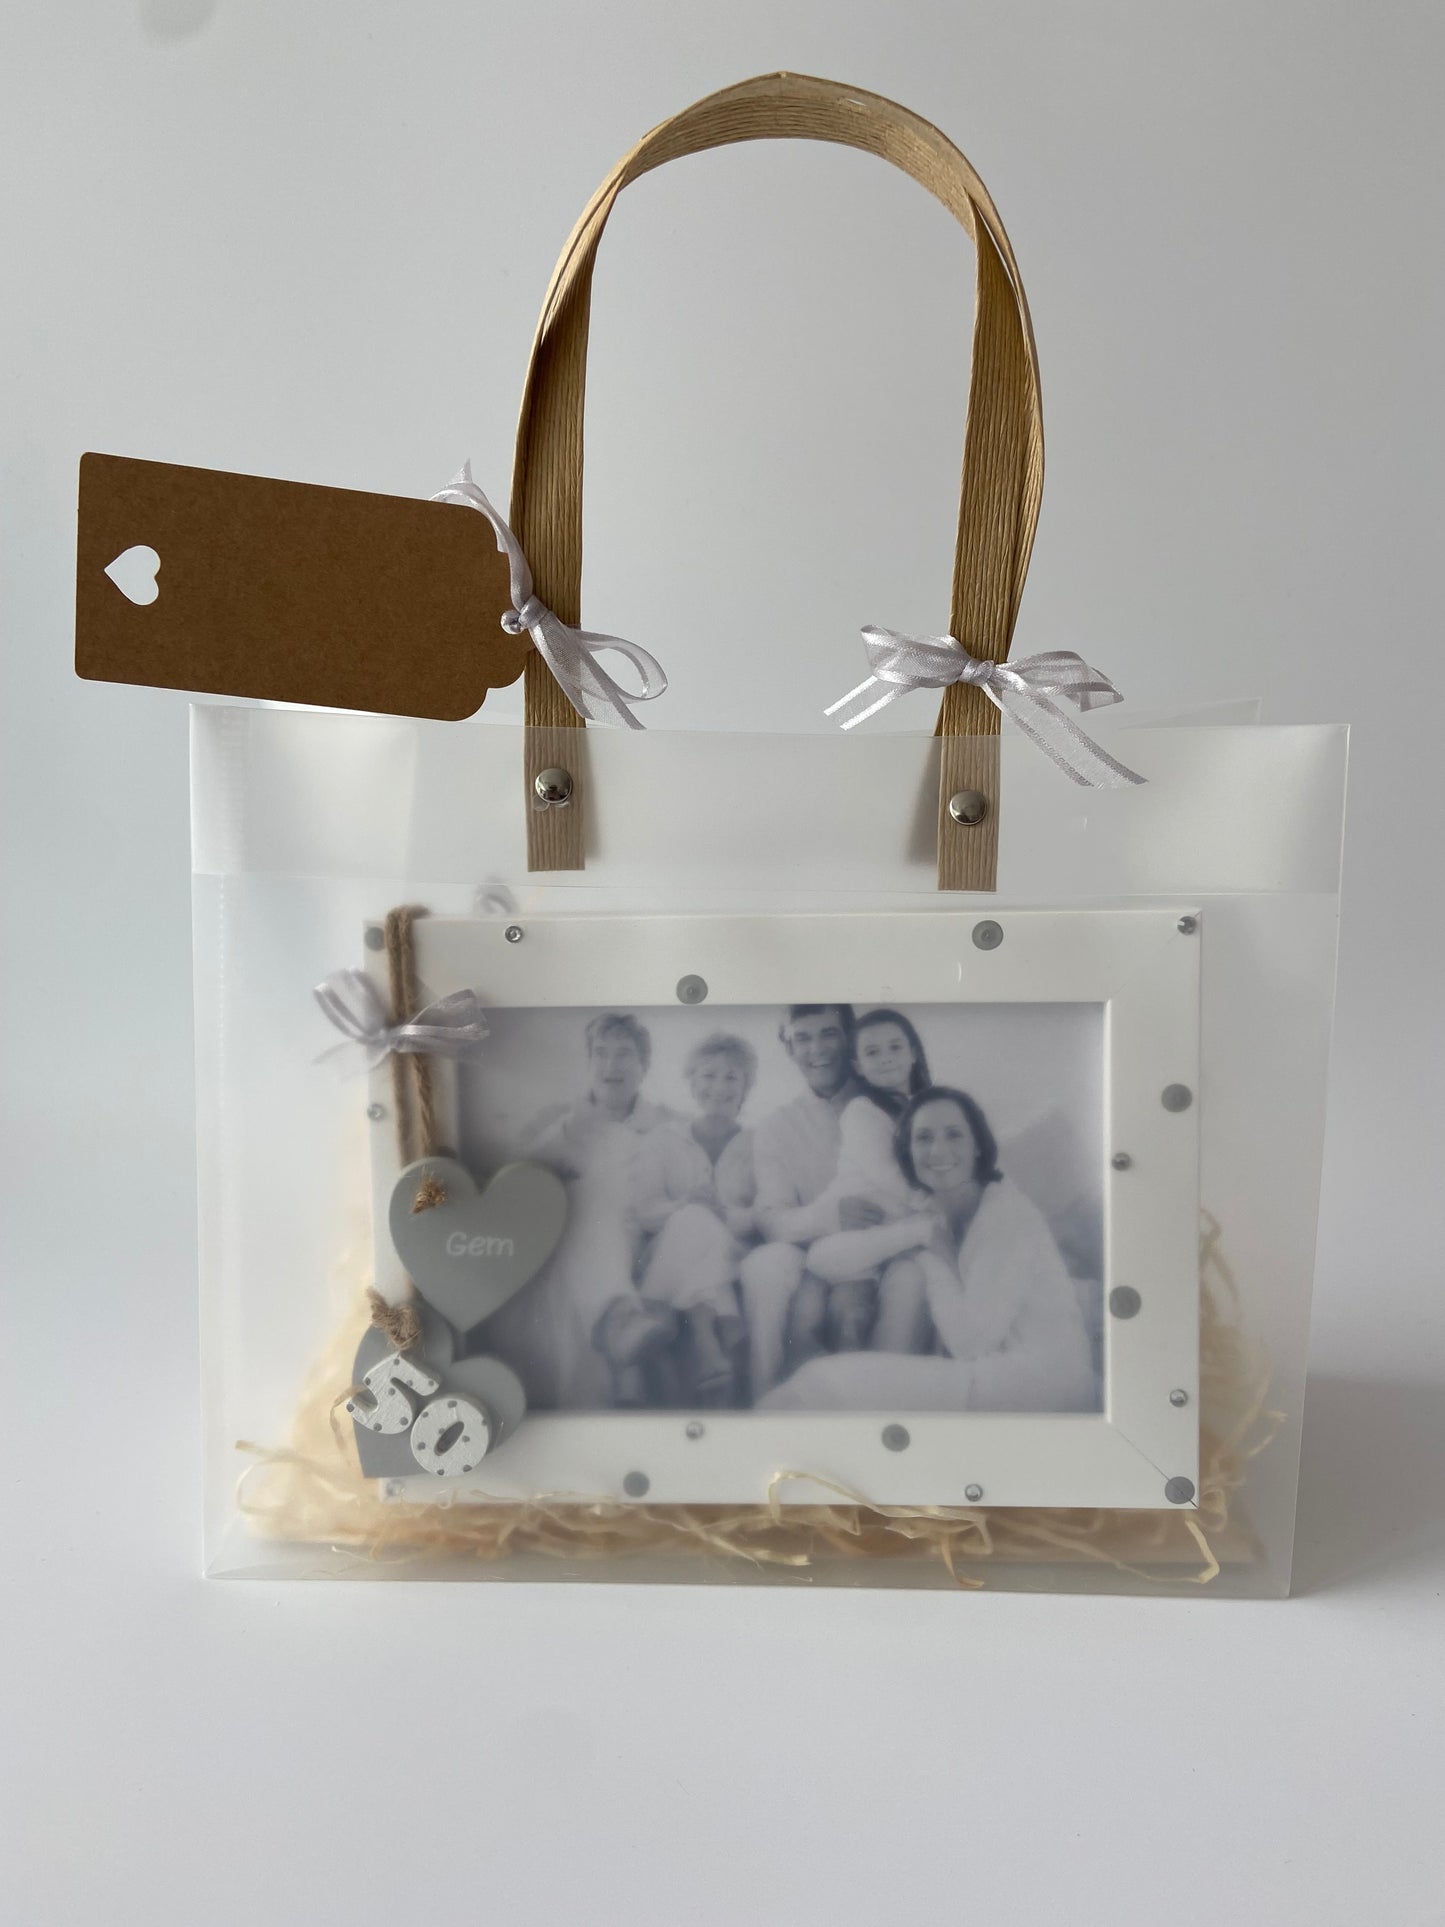 Image shows a 50th photo frame included in gift set, decorated with polka dots, gems and ribbon